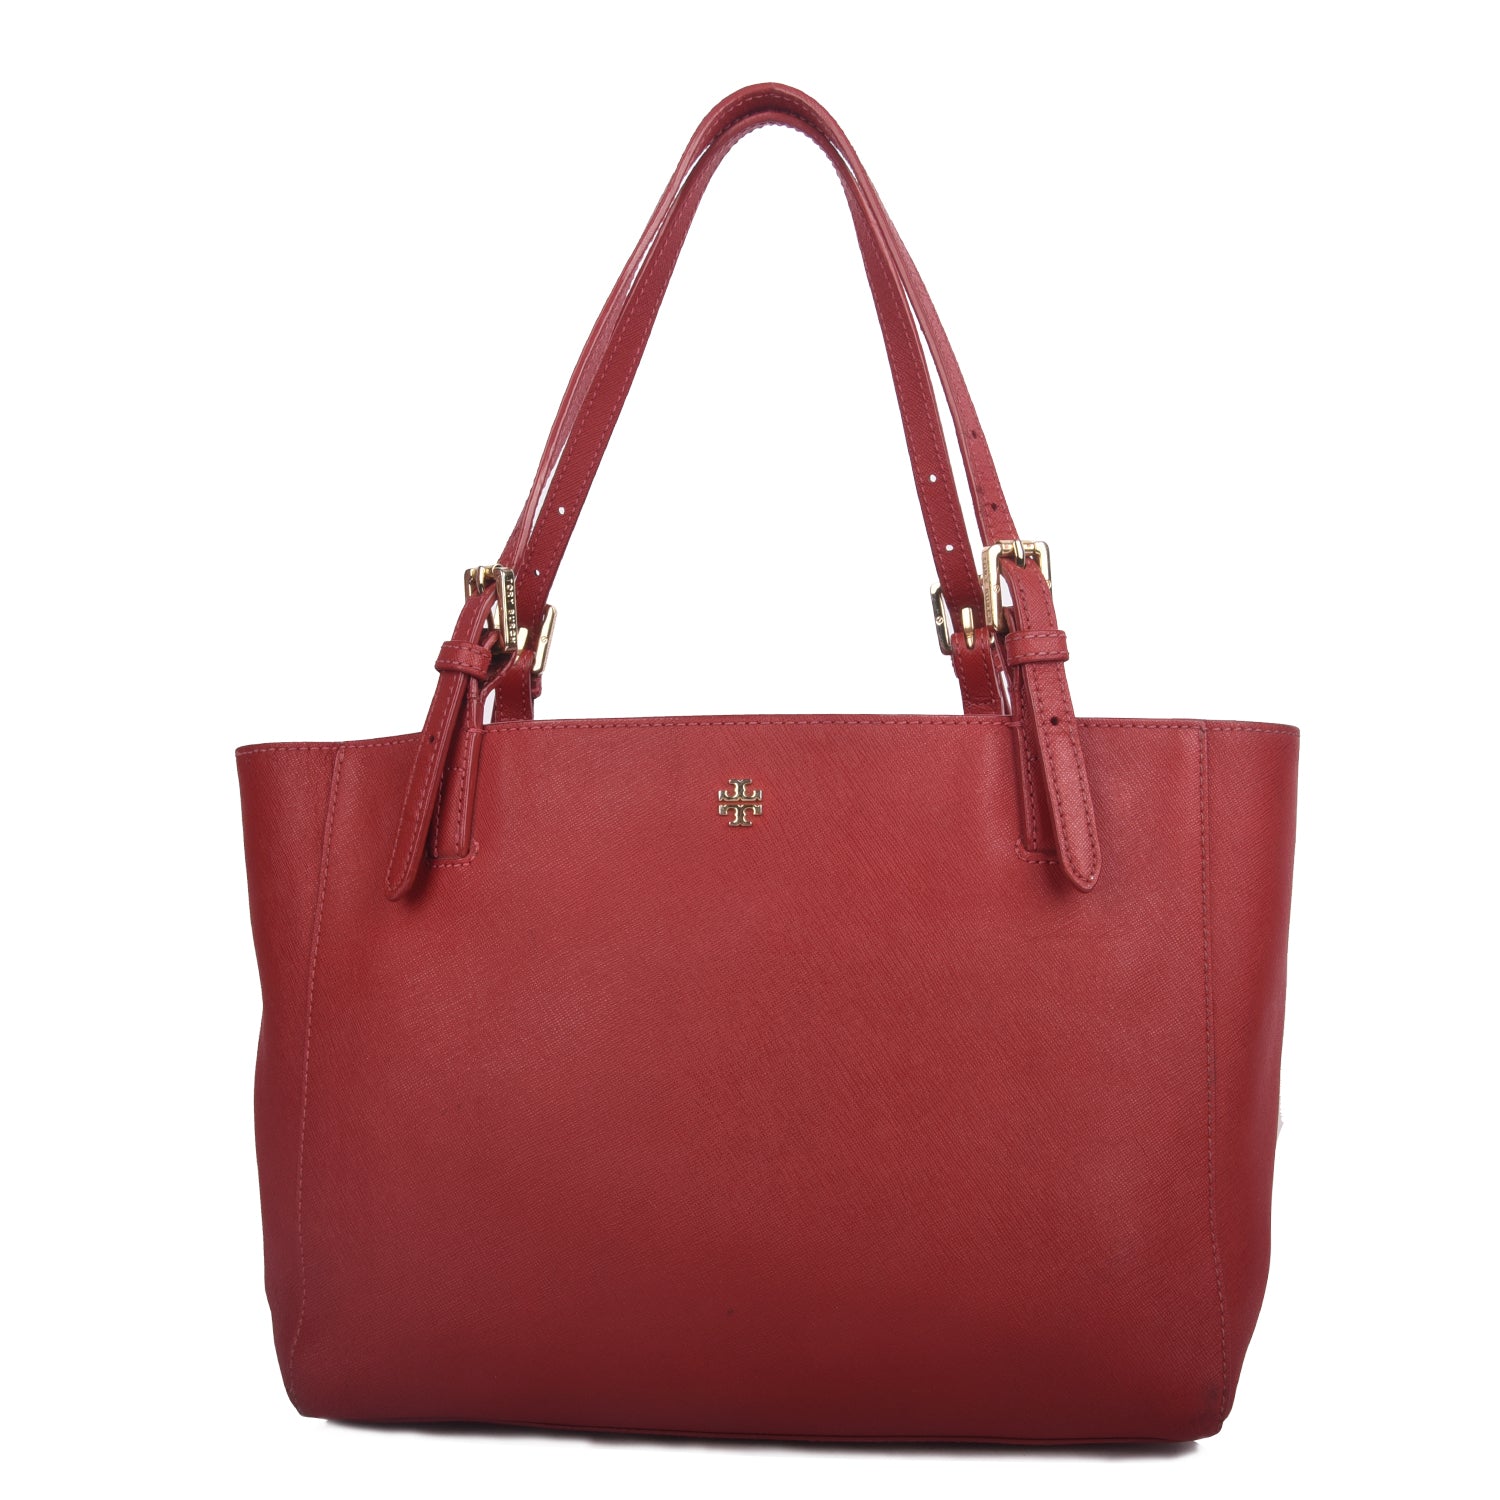 Tory Burch Red Leather York Buckle Tote Bag